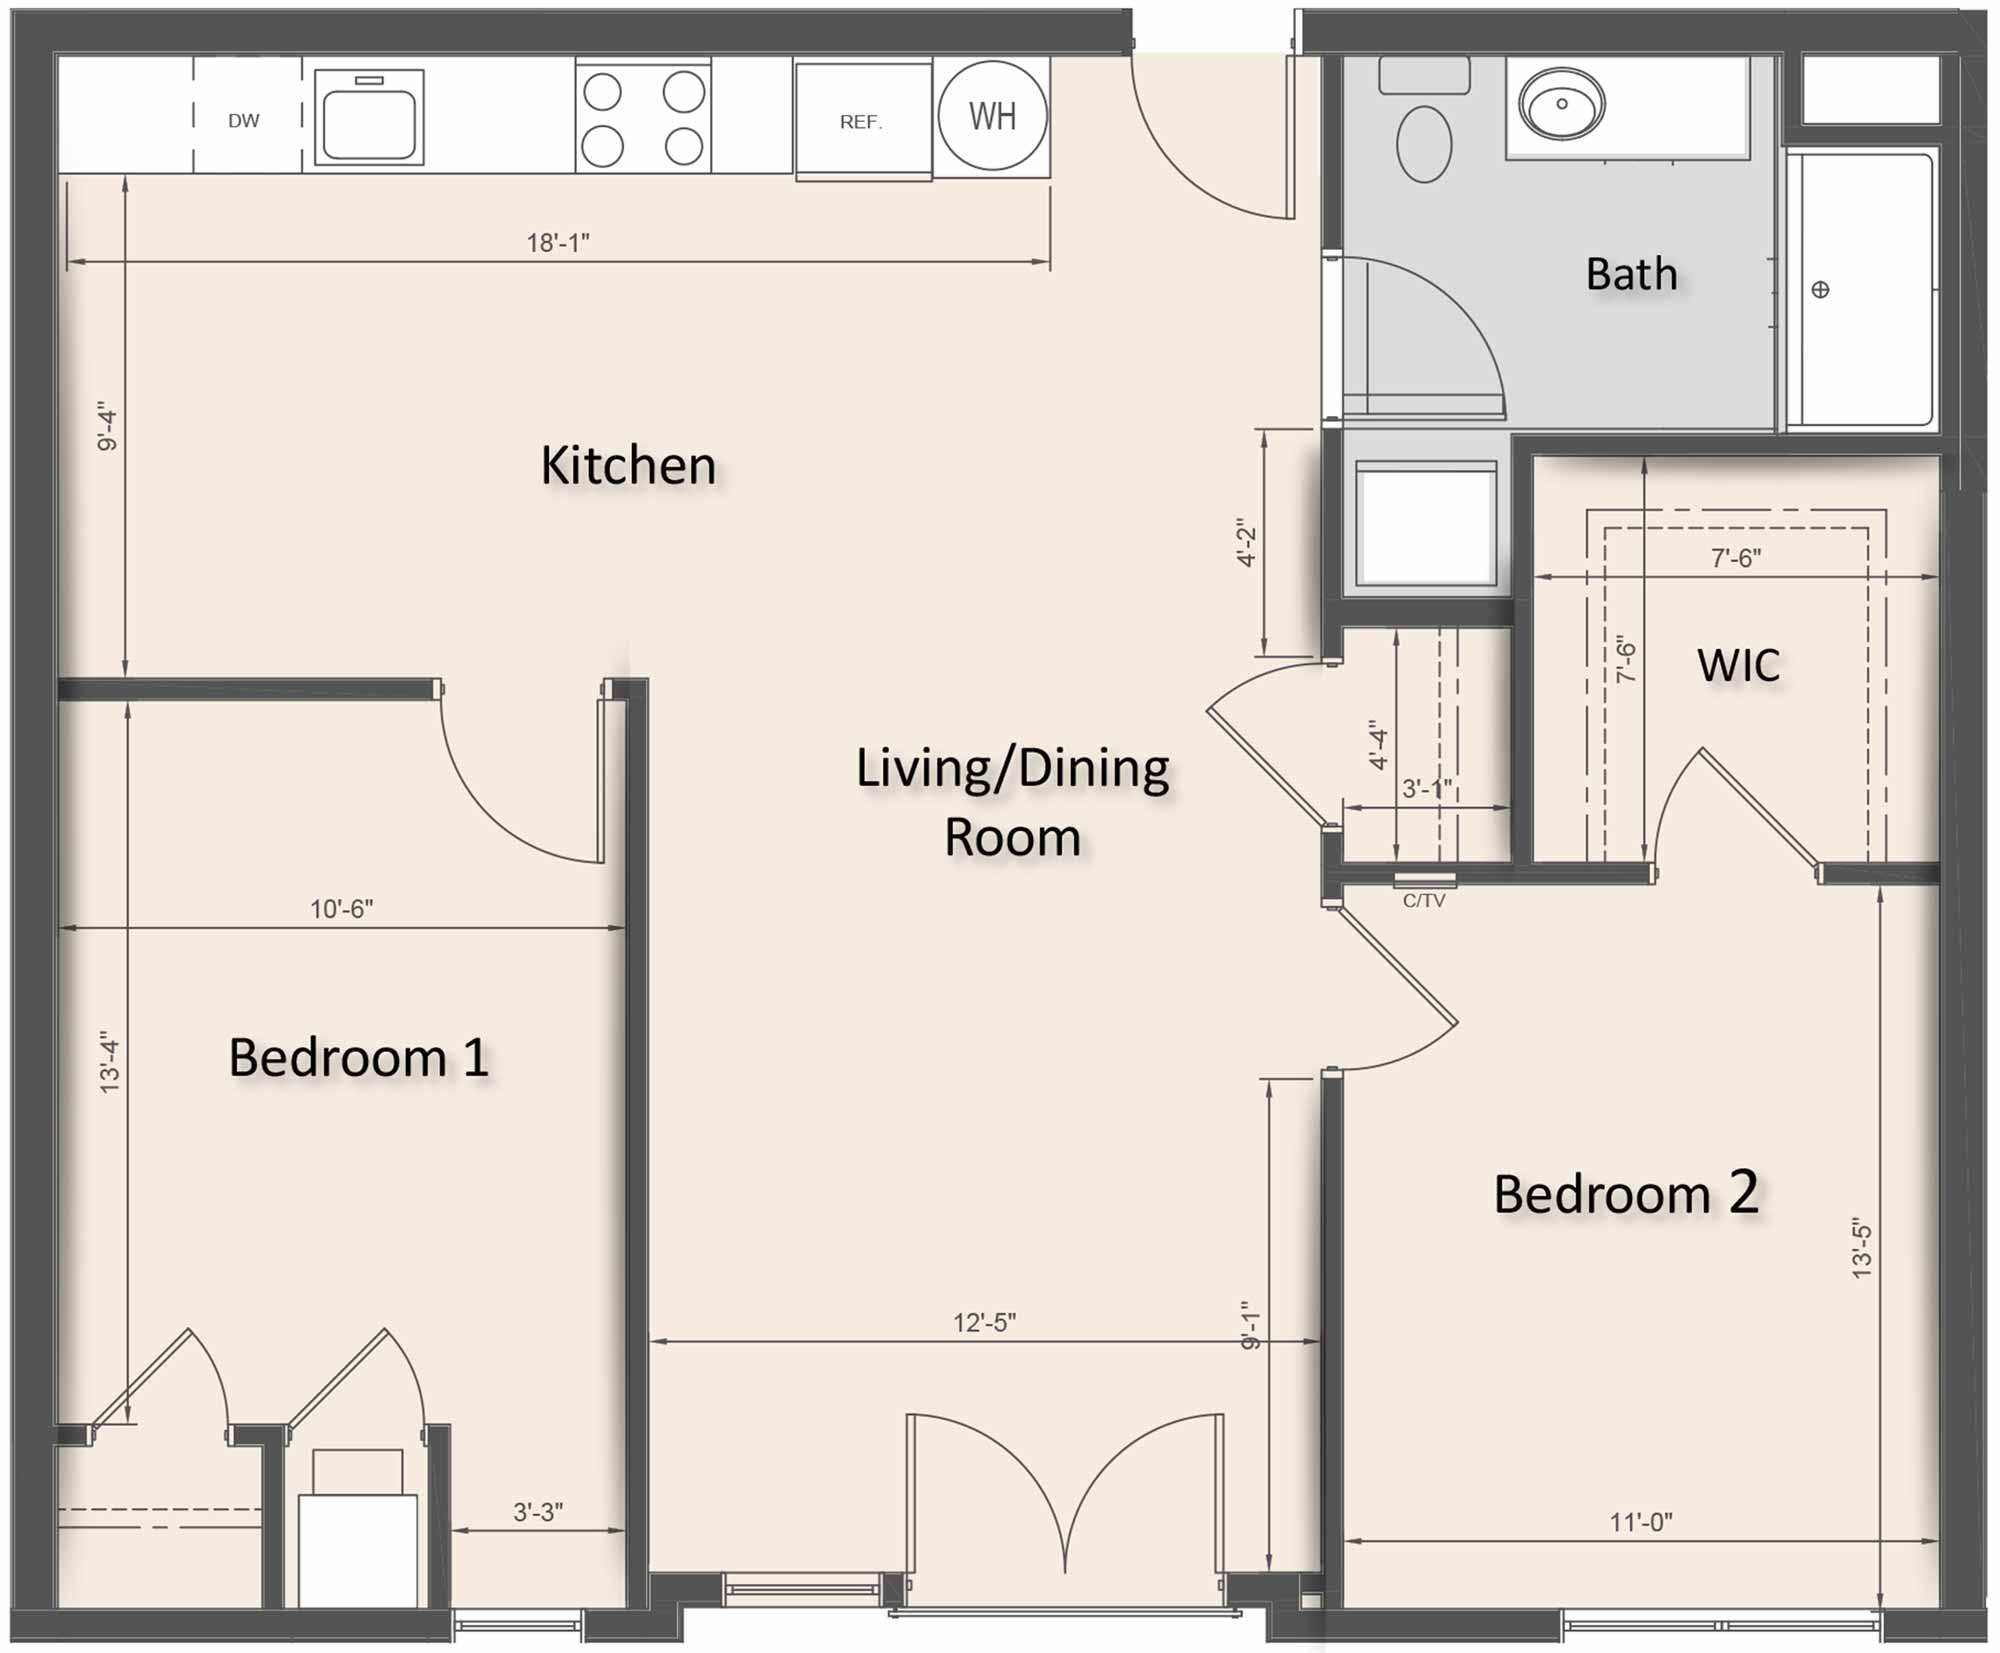 TYPE "D" - TWO BEDROOM (964 SF)